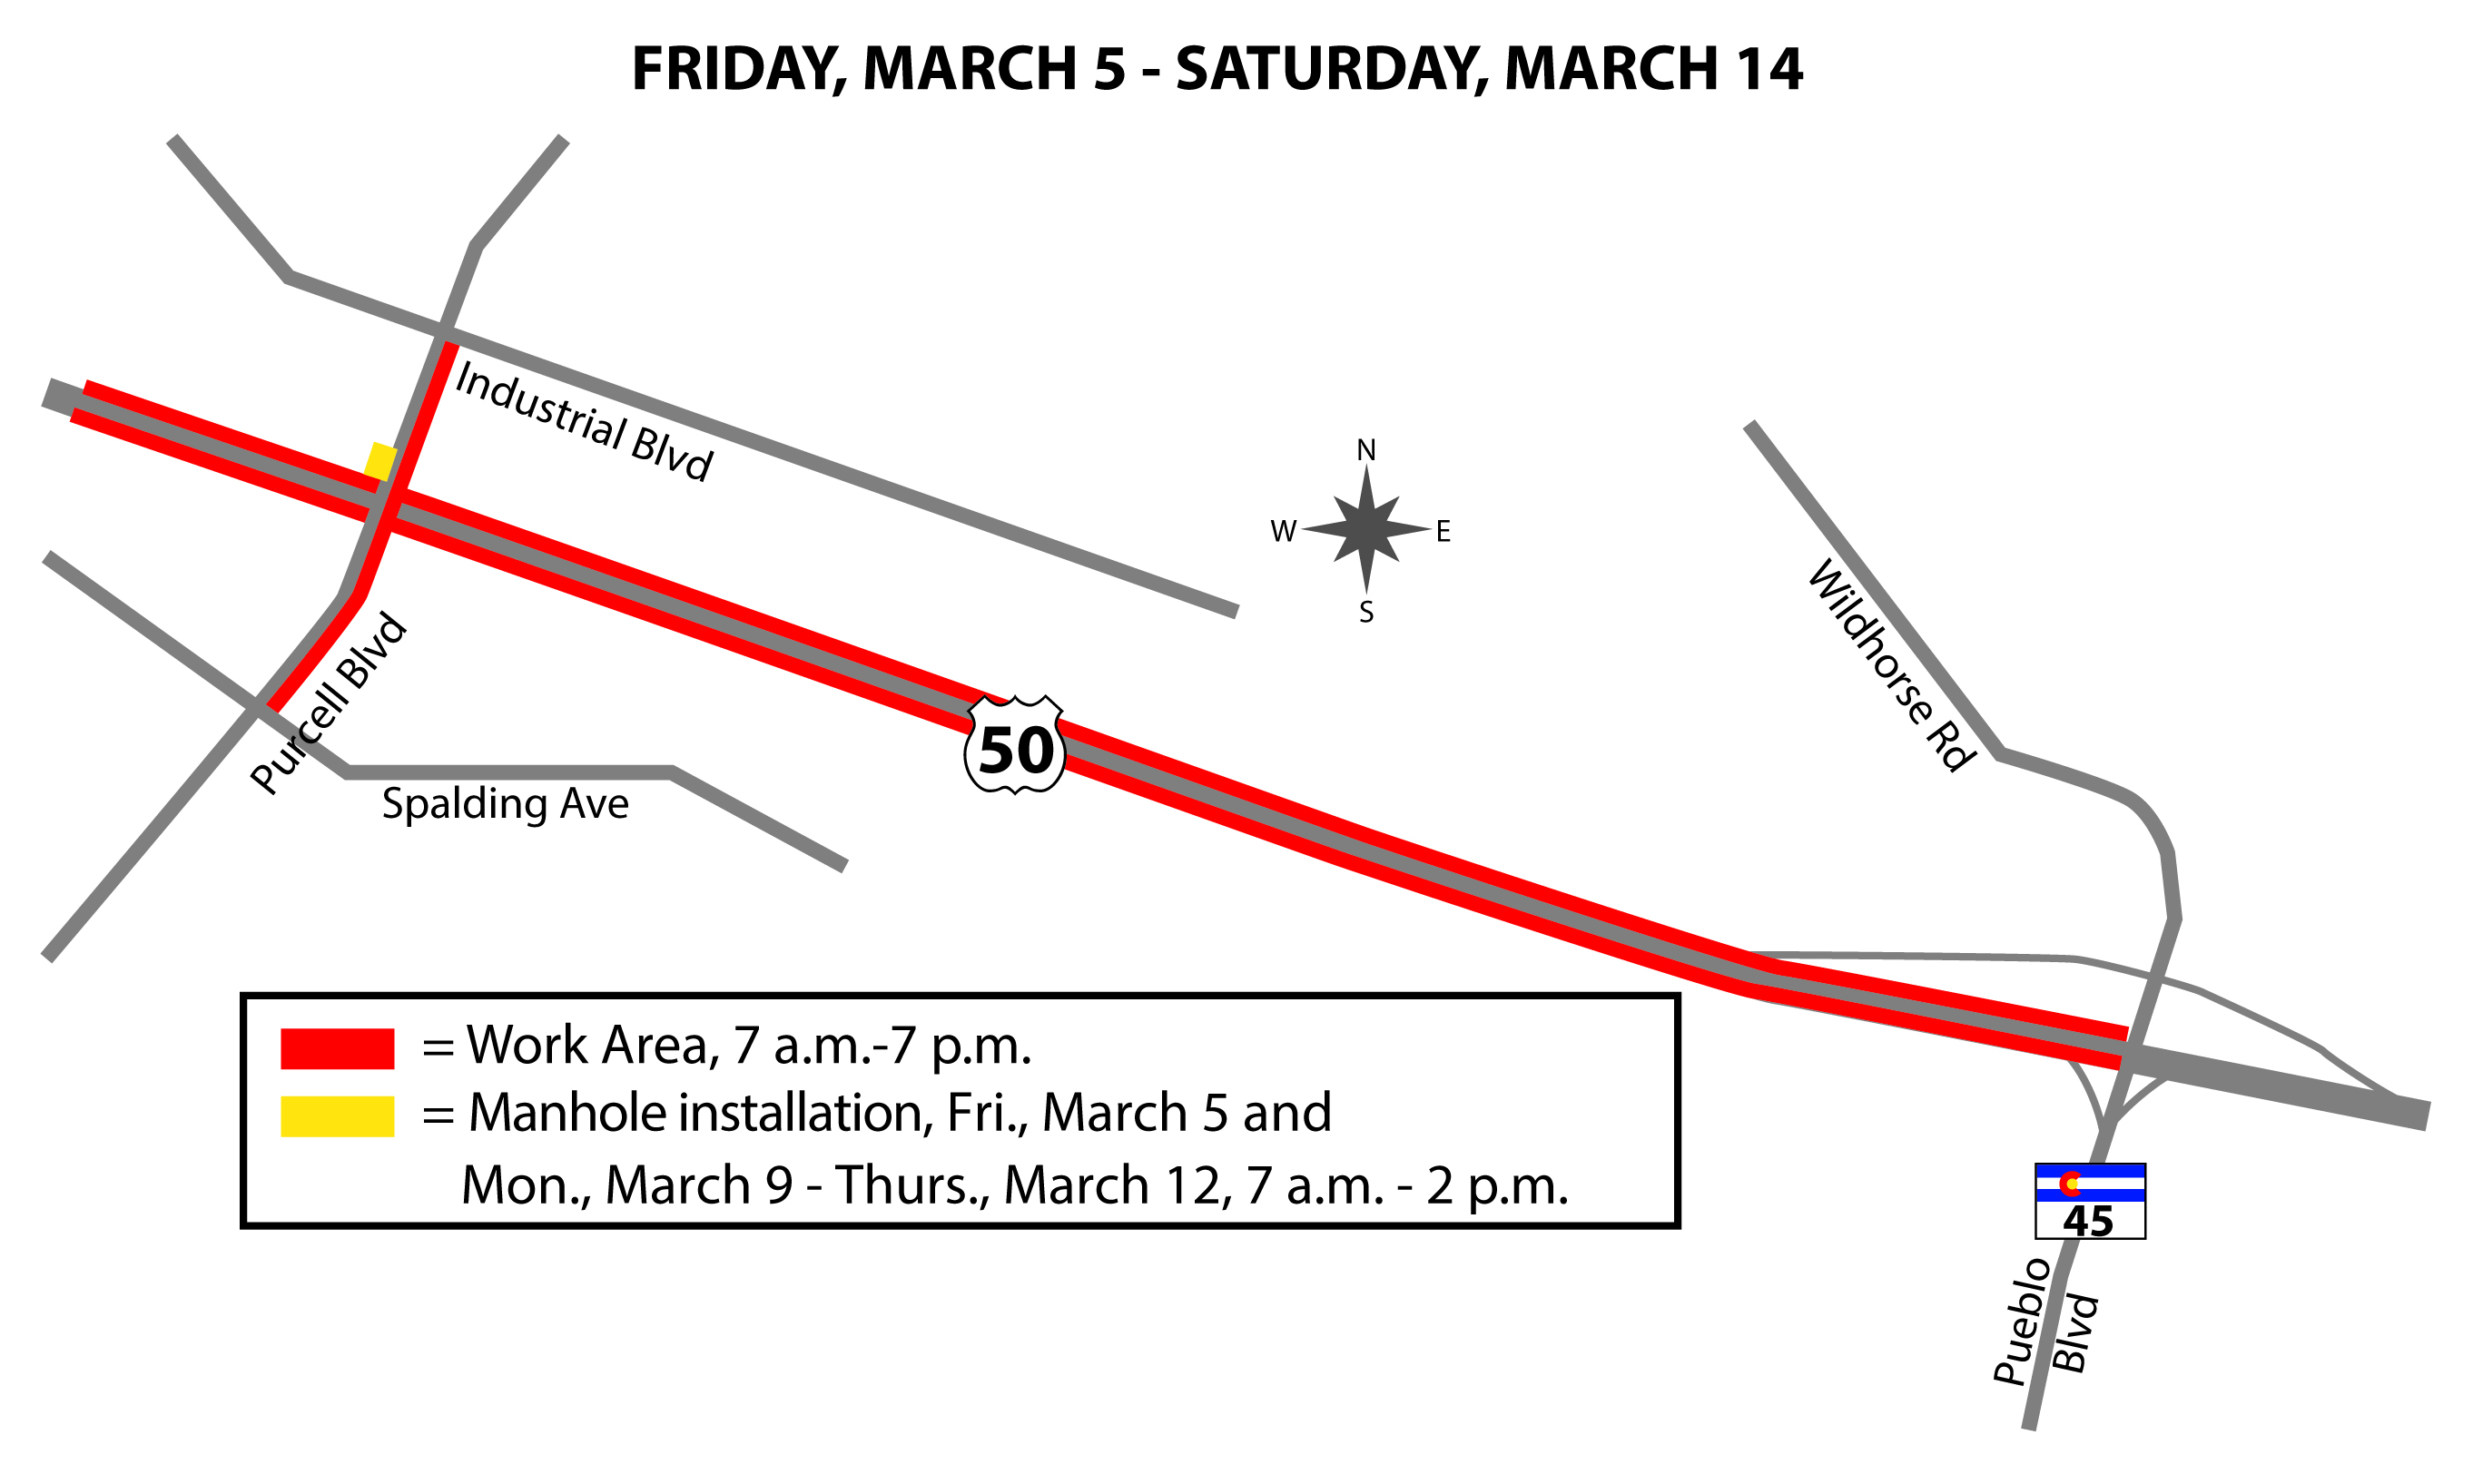 US 50 Purcell Traffic Advisory map MARCH 5.jpg detail image